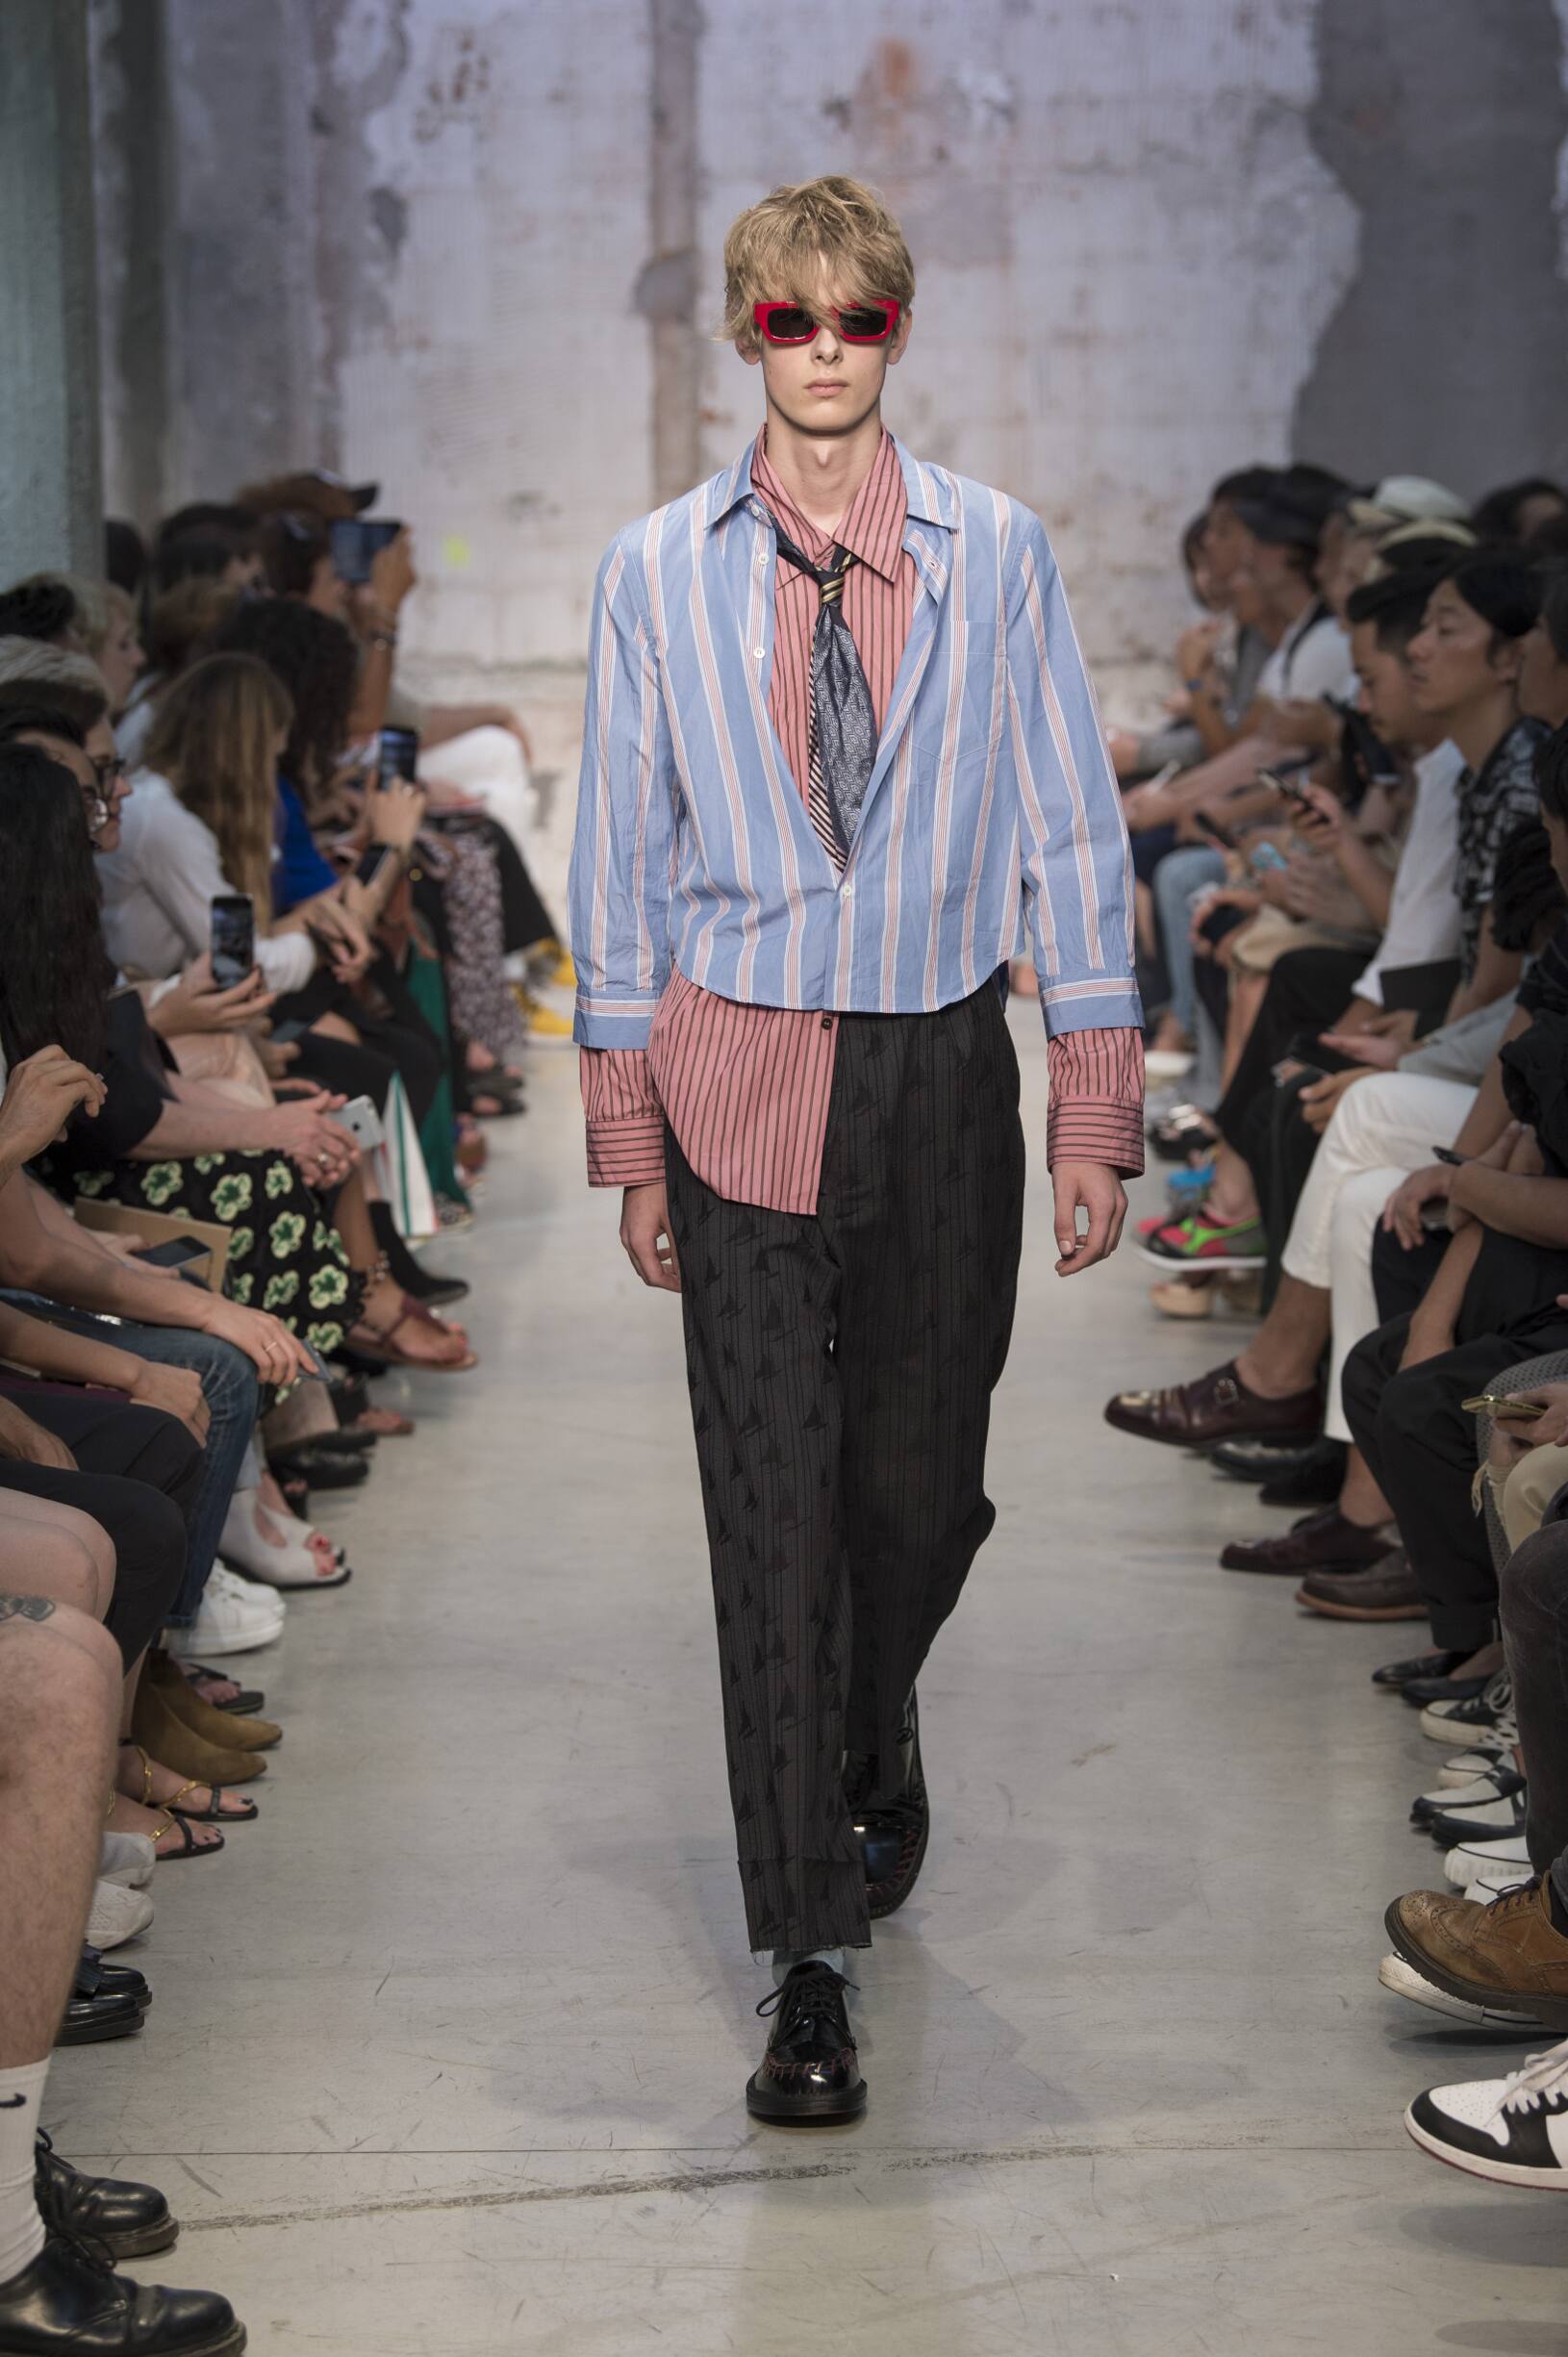 MARNI SPRING SUMMER 2018 MEN’S COLLECTION | The Skinny Beep